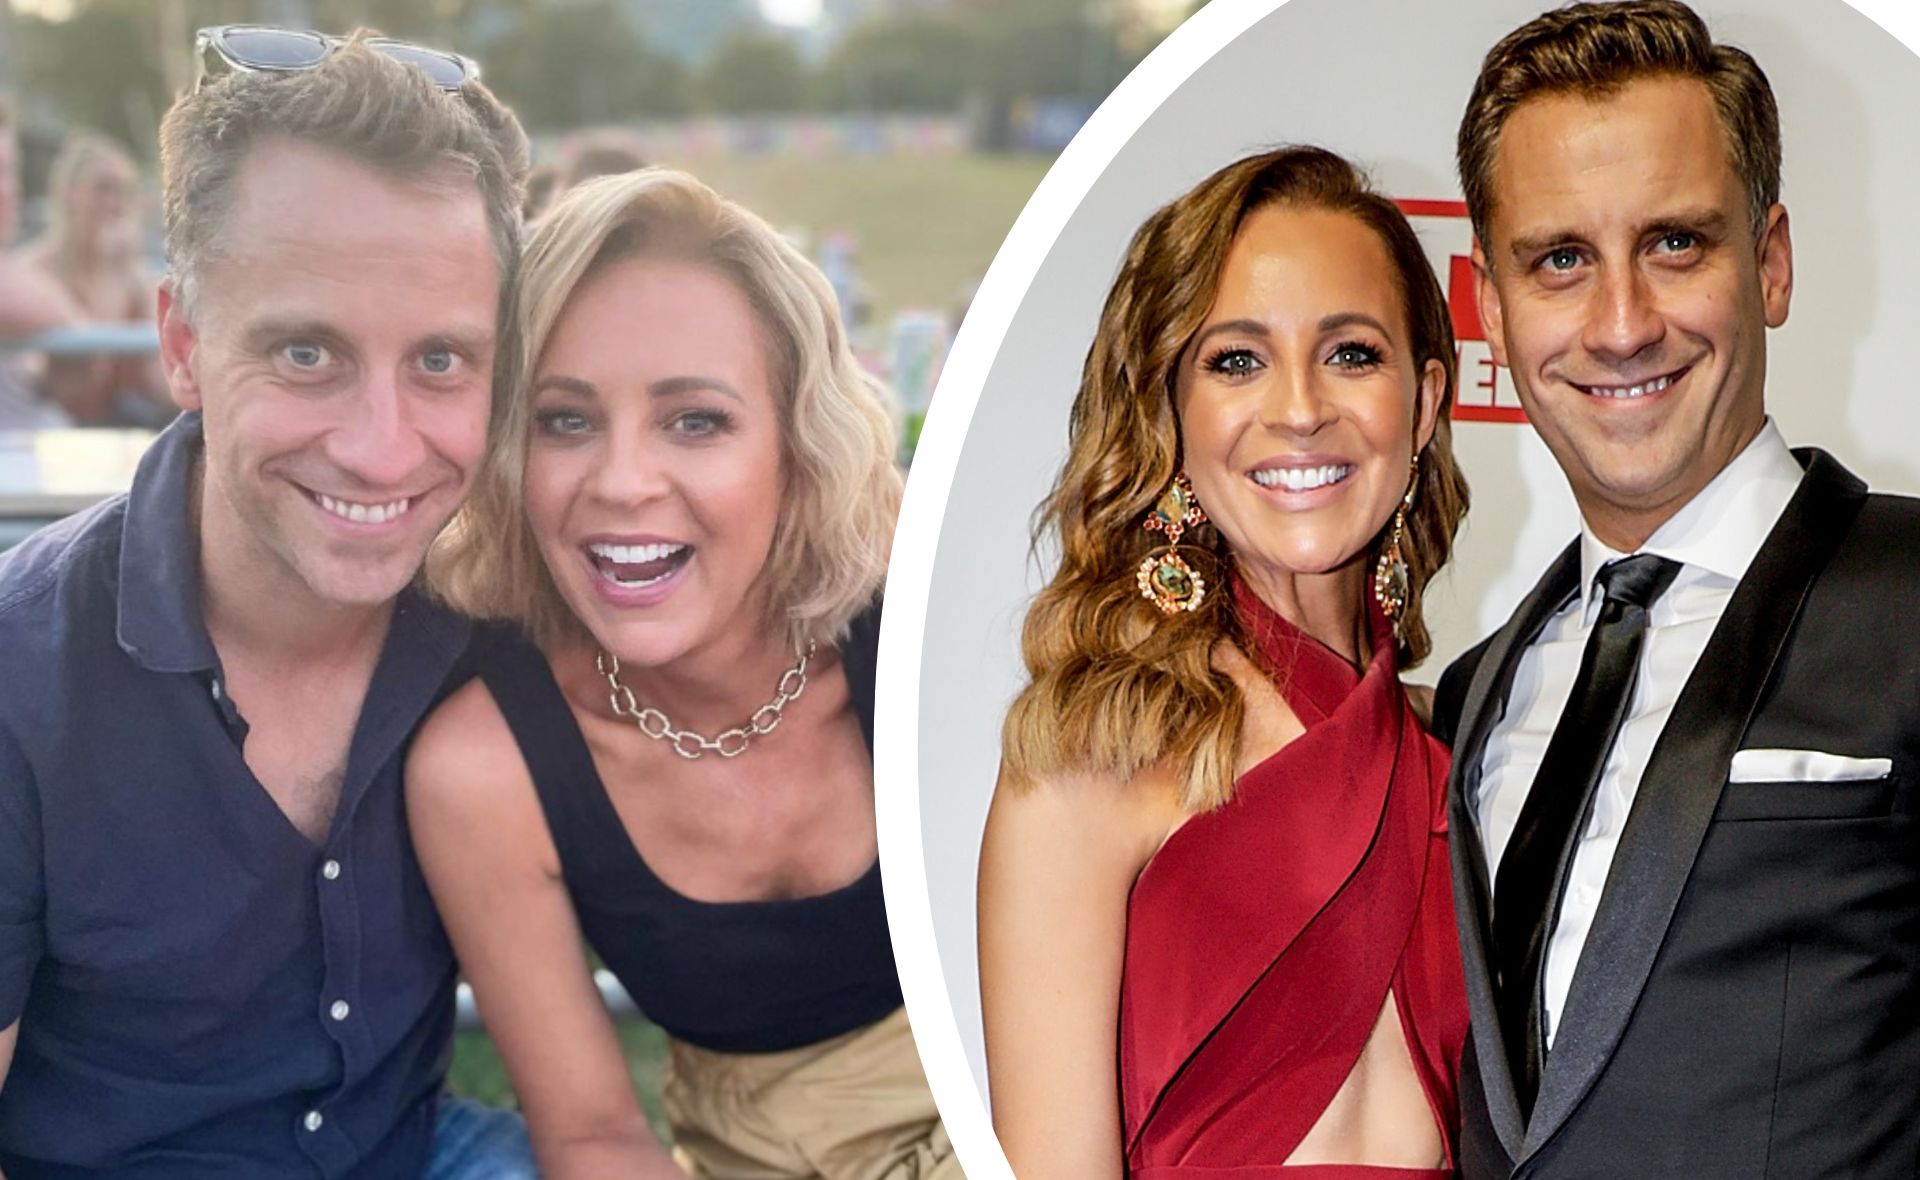 After meeting on The Project, Carrie Bickmore and Chris Walker were deeply in love